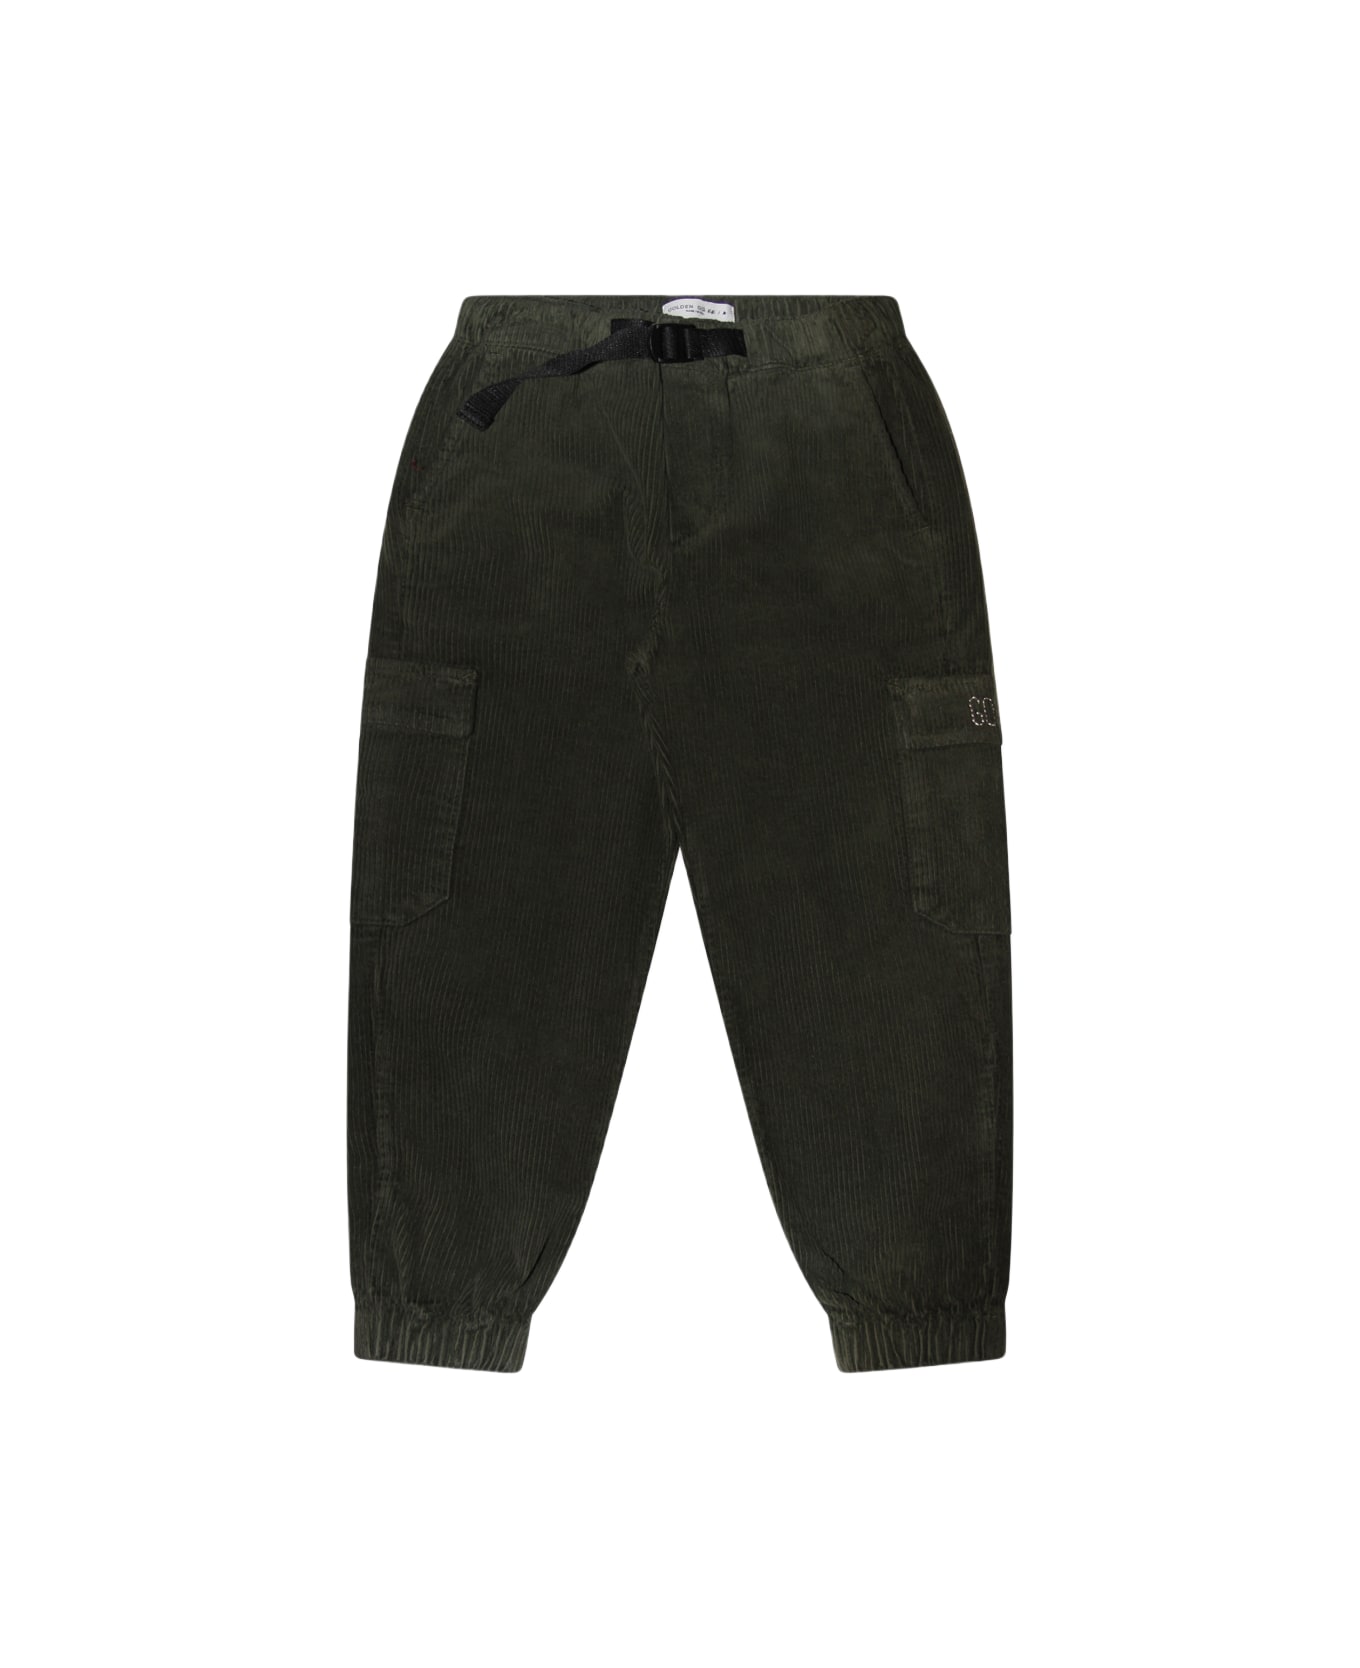 Golden Goose Ivy Green Cotton Track Pants - IVY GREEN